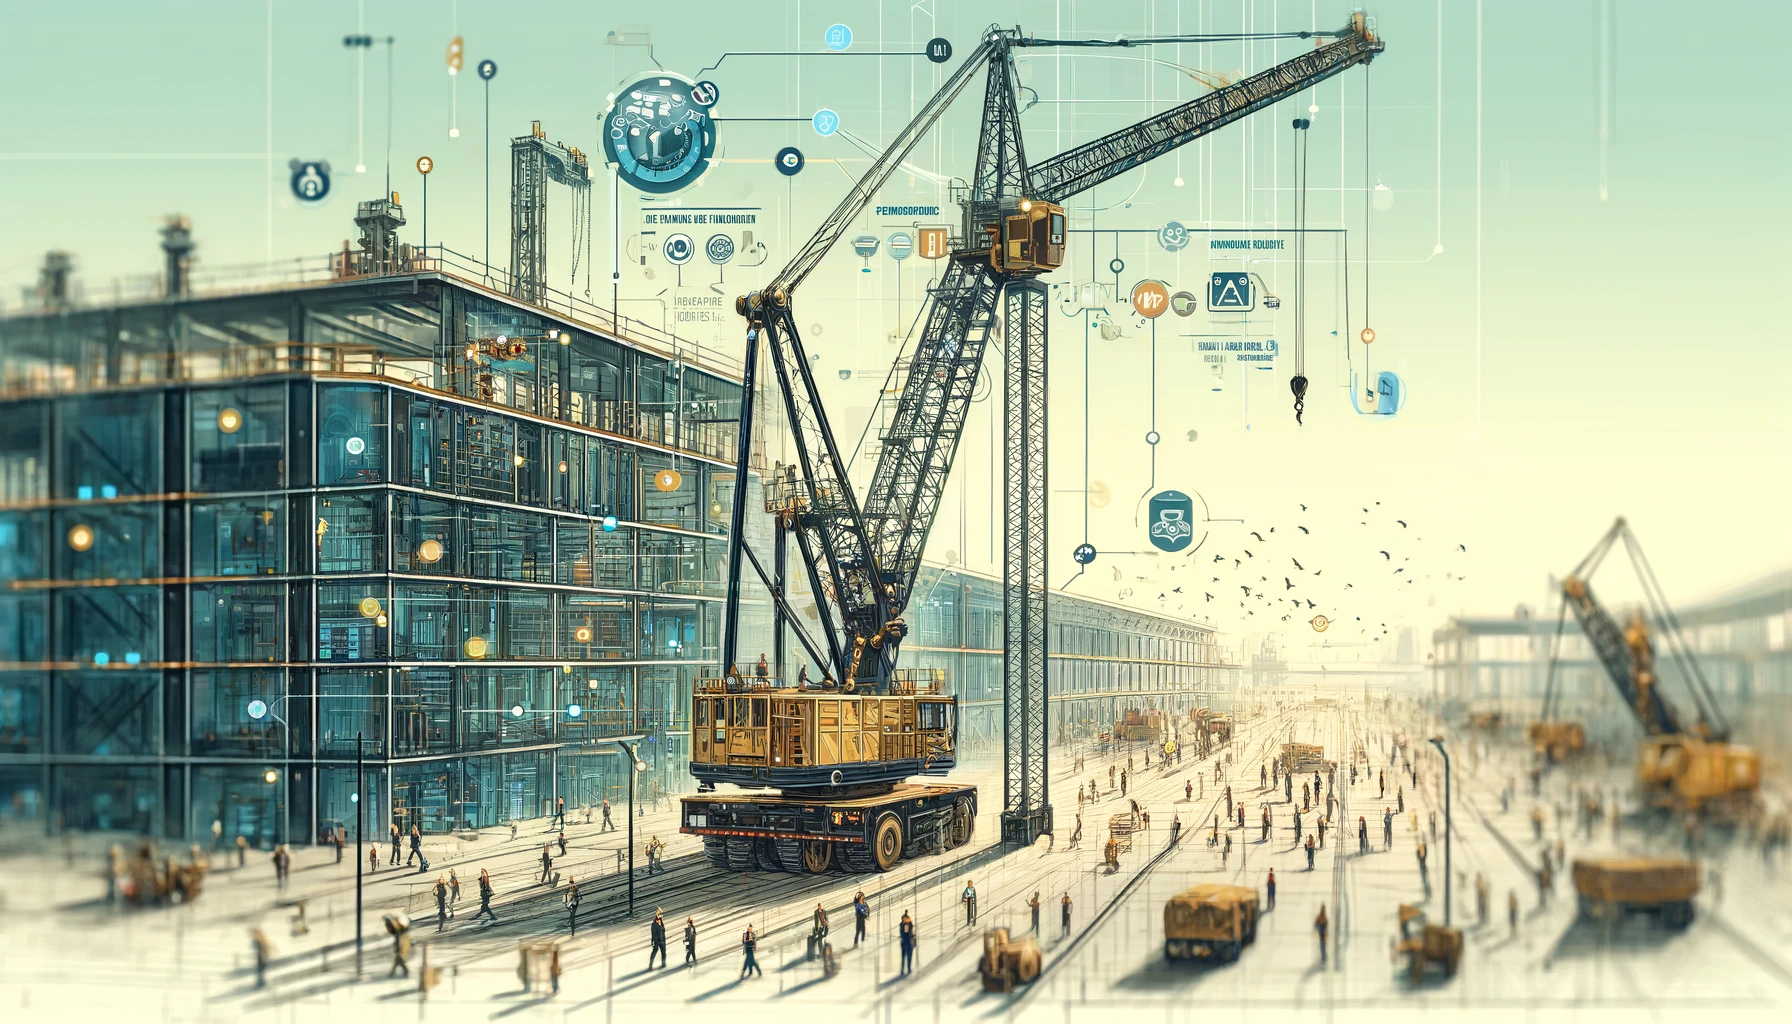 Here is the illustration for the article about the construction company's use of AI to optimize crane operations.